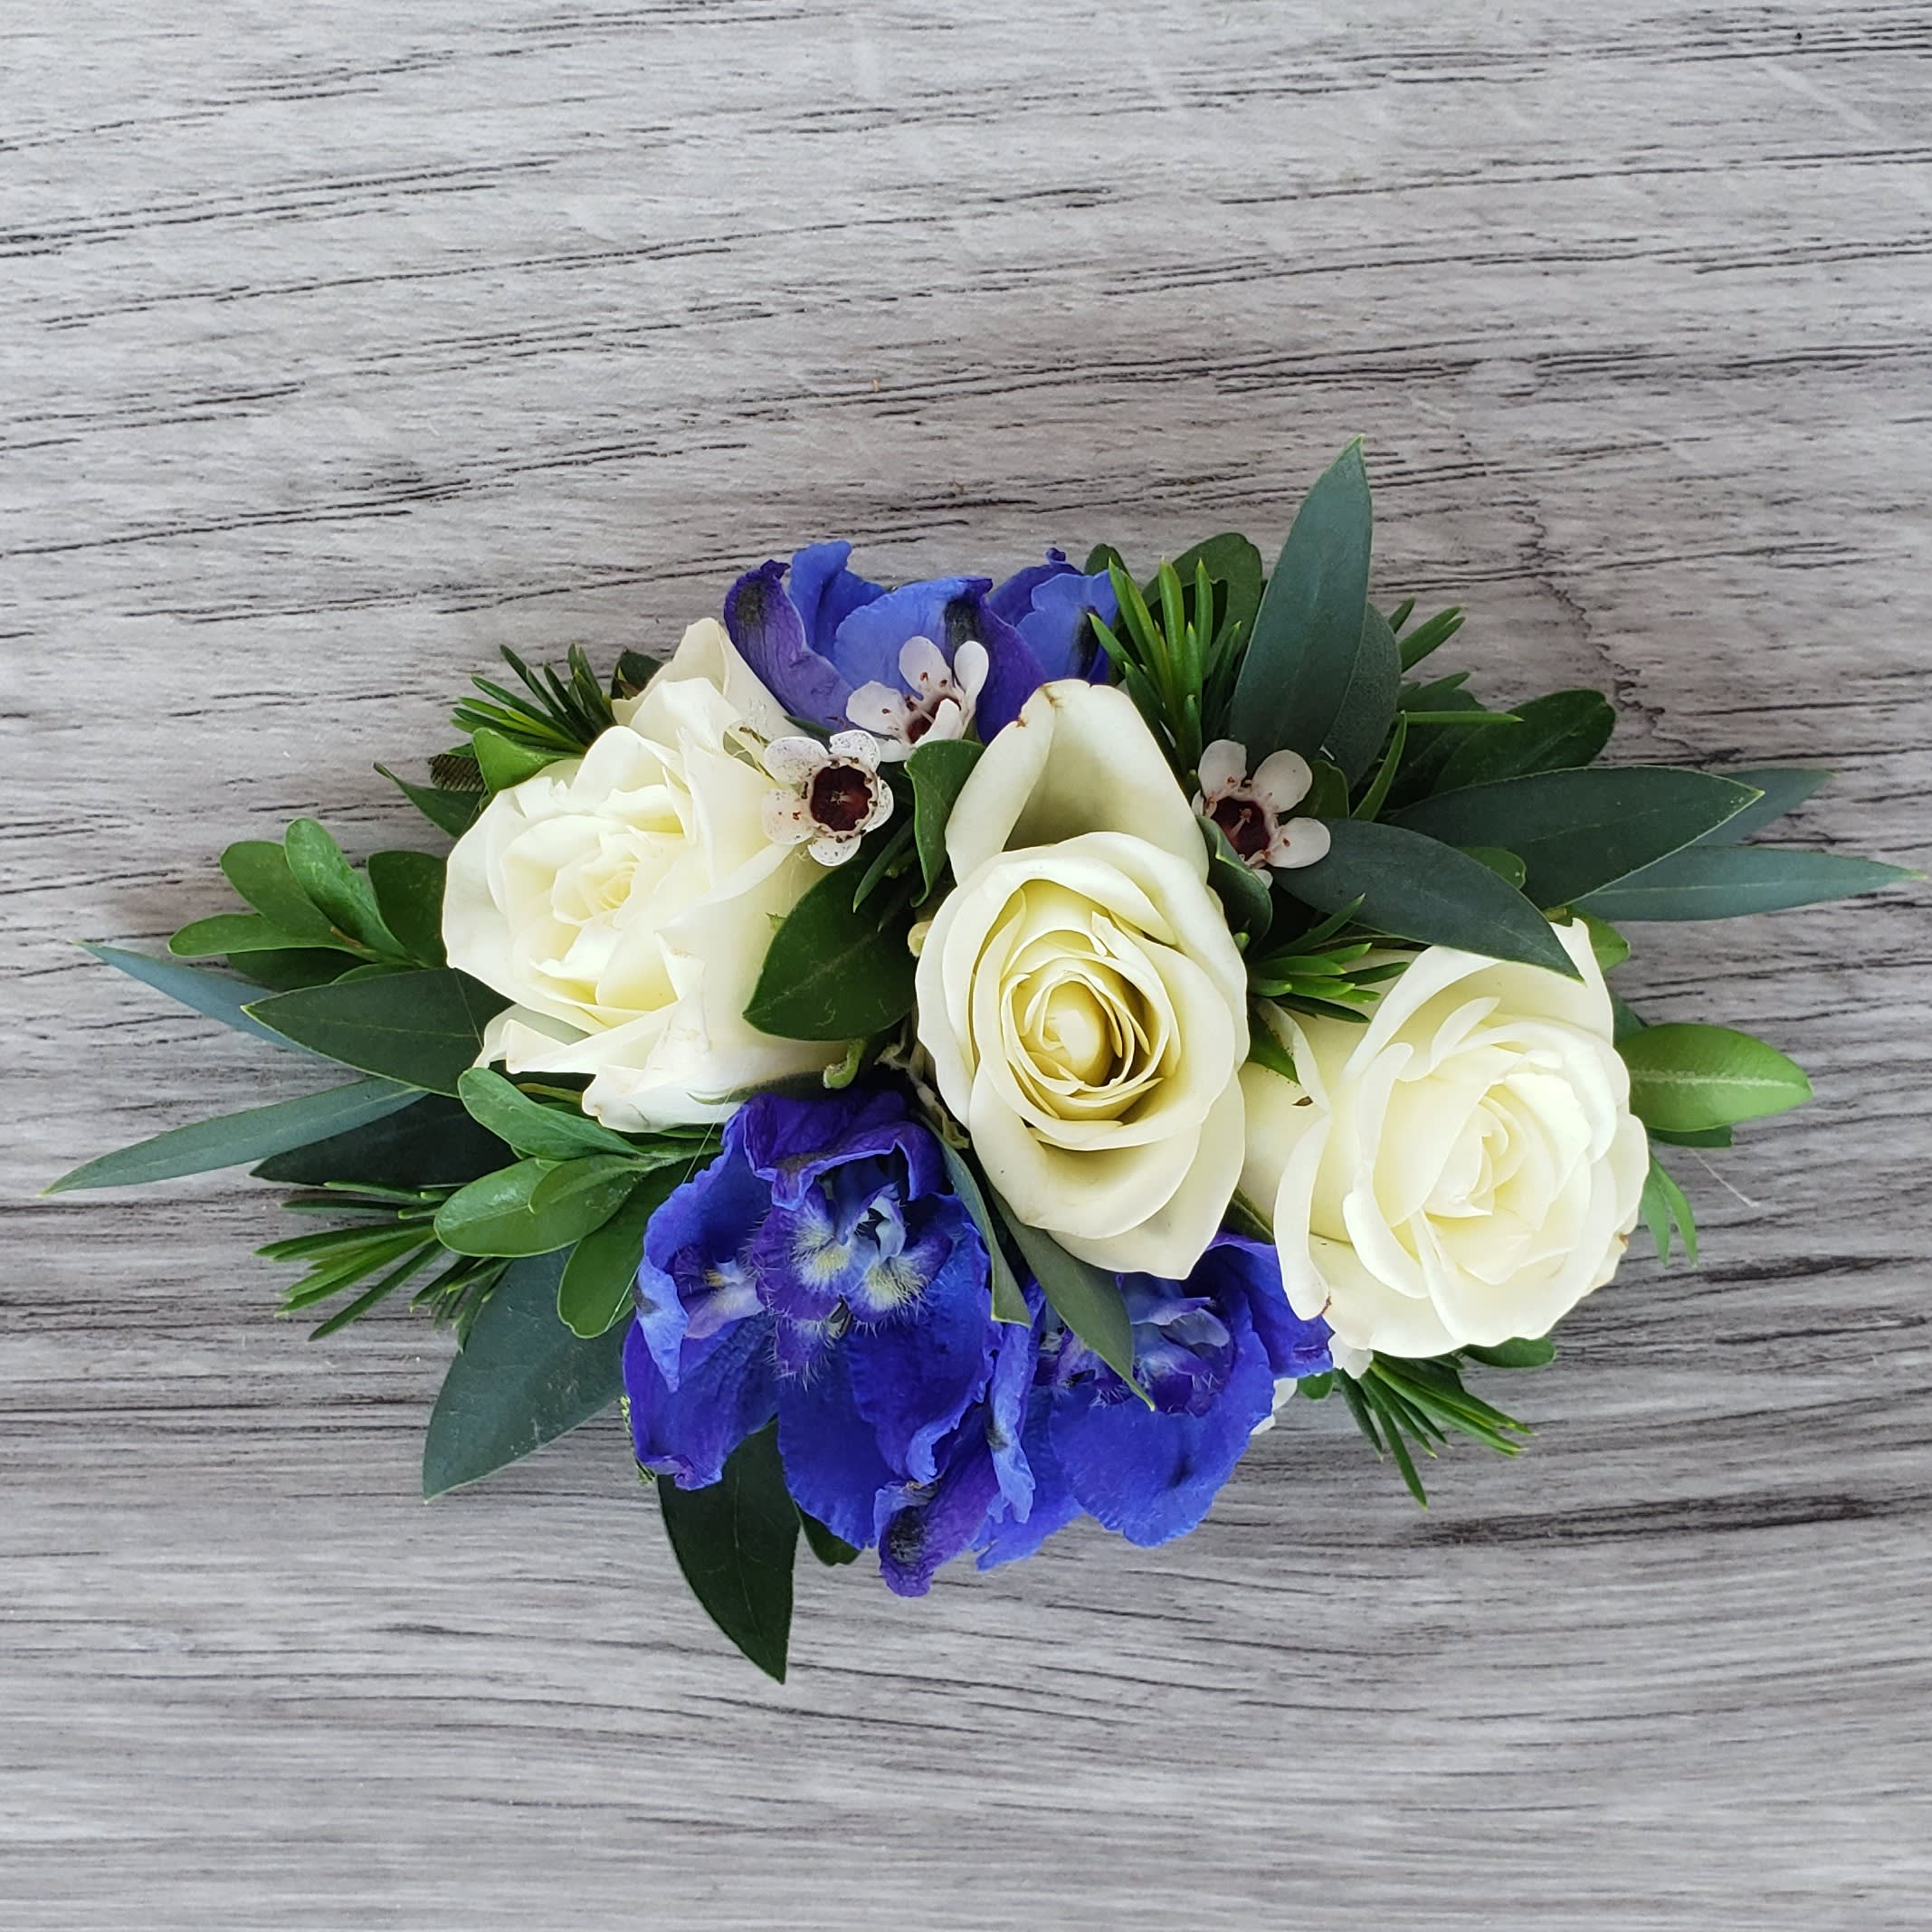 Blue and White Petite Corsage - This corsage is more petite in size and features white spray roses, blue delphinium, and complementary greens and accent flower. If you would like to exchange the colors of the flowers please let us know and we will be happy to accommodate. 